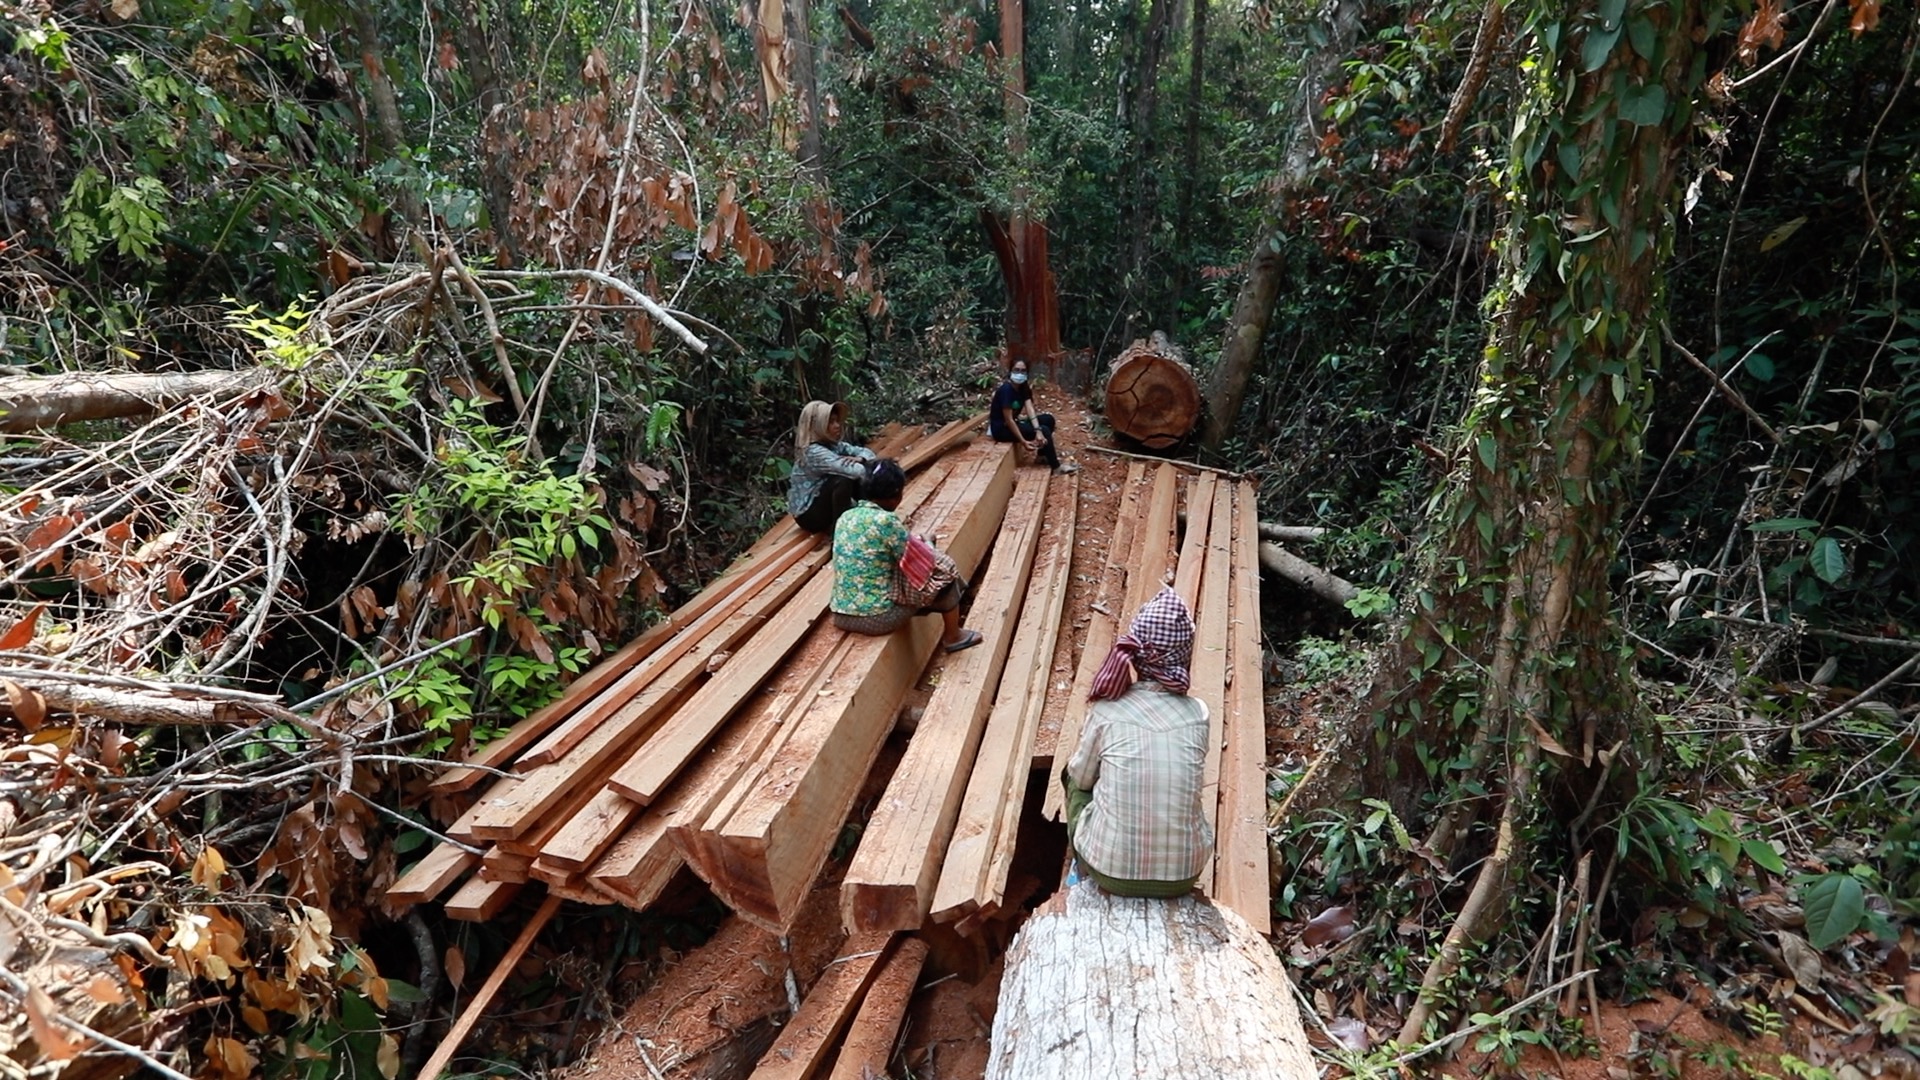 The spike in illegal logging has continued over the years, with more and more of the protected forest being opened up due to economic land concessions. Image by Chasing Deforestation / Mongabay.